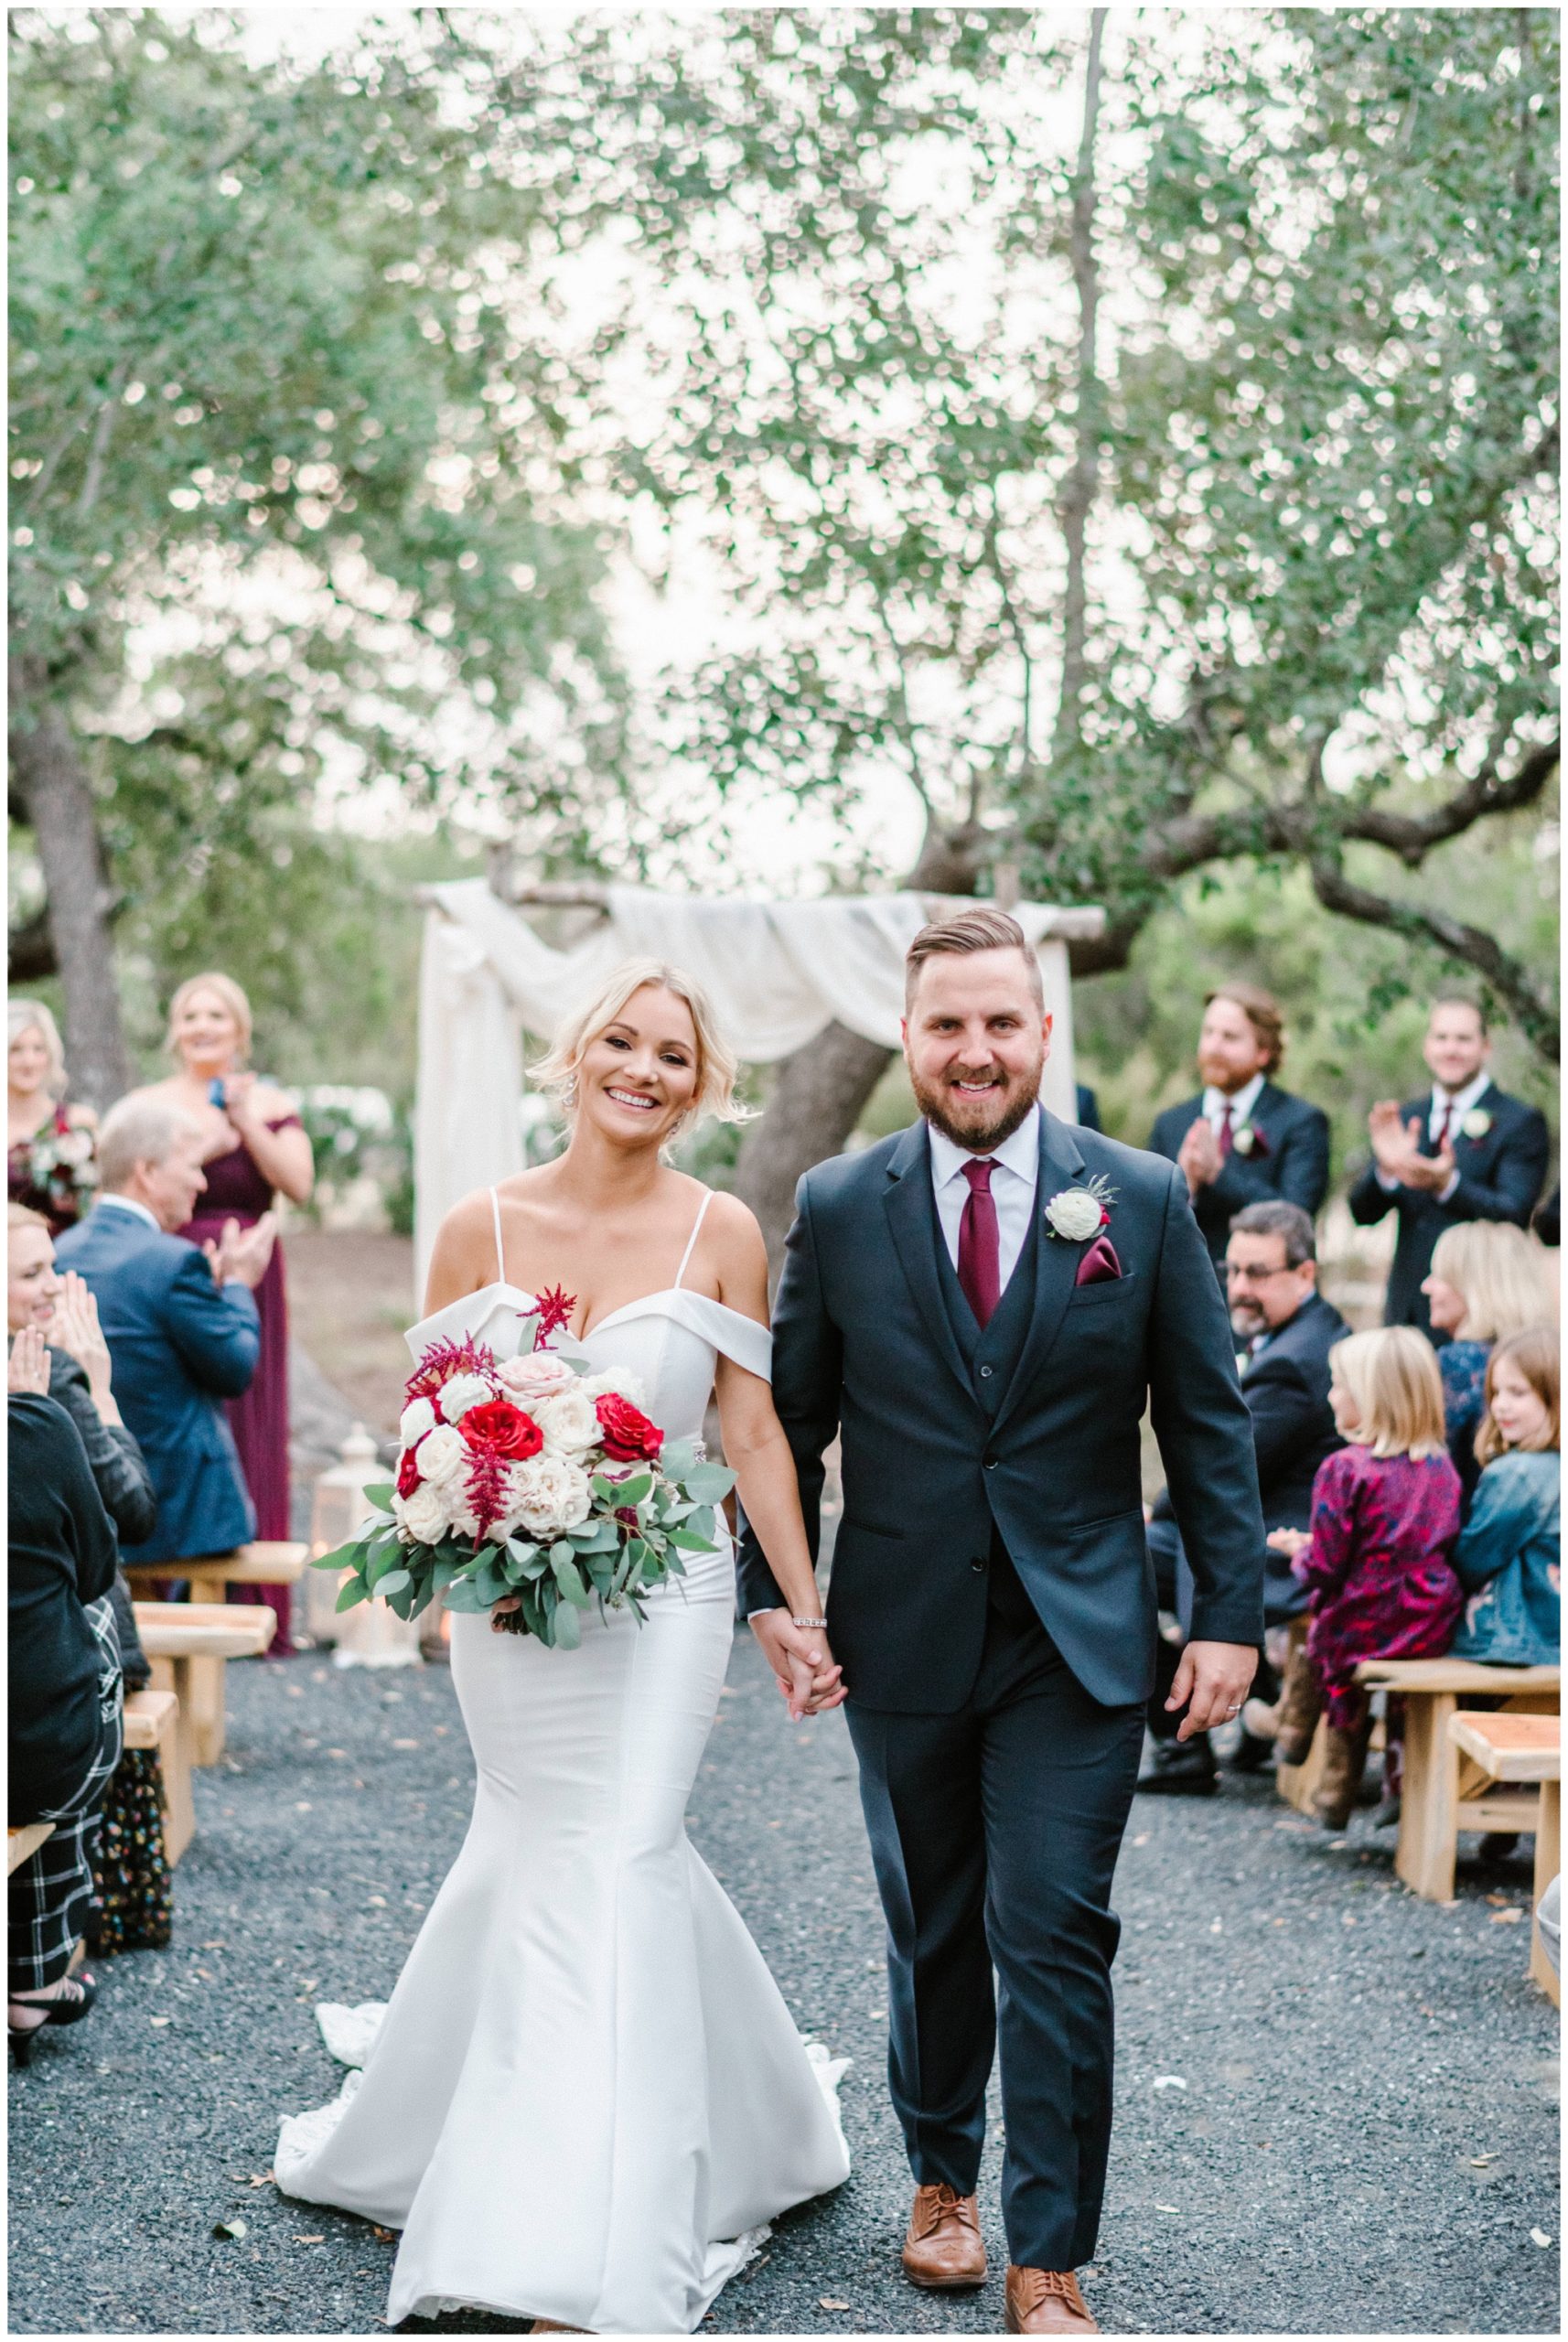 Light and airy wedding ceremony photography, Cedars Ranch wedding ceremony light and airy wedding photographer, Joslyn Holtfort Photography